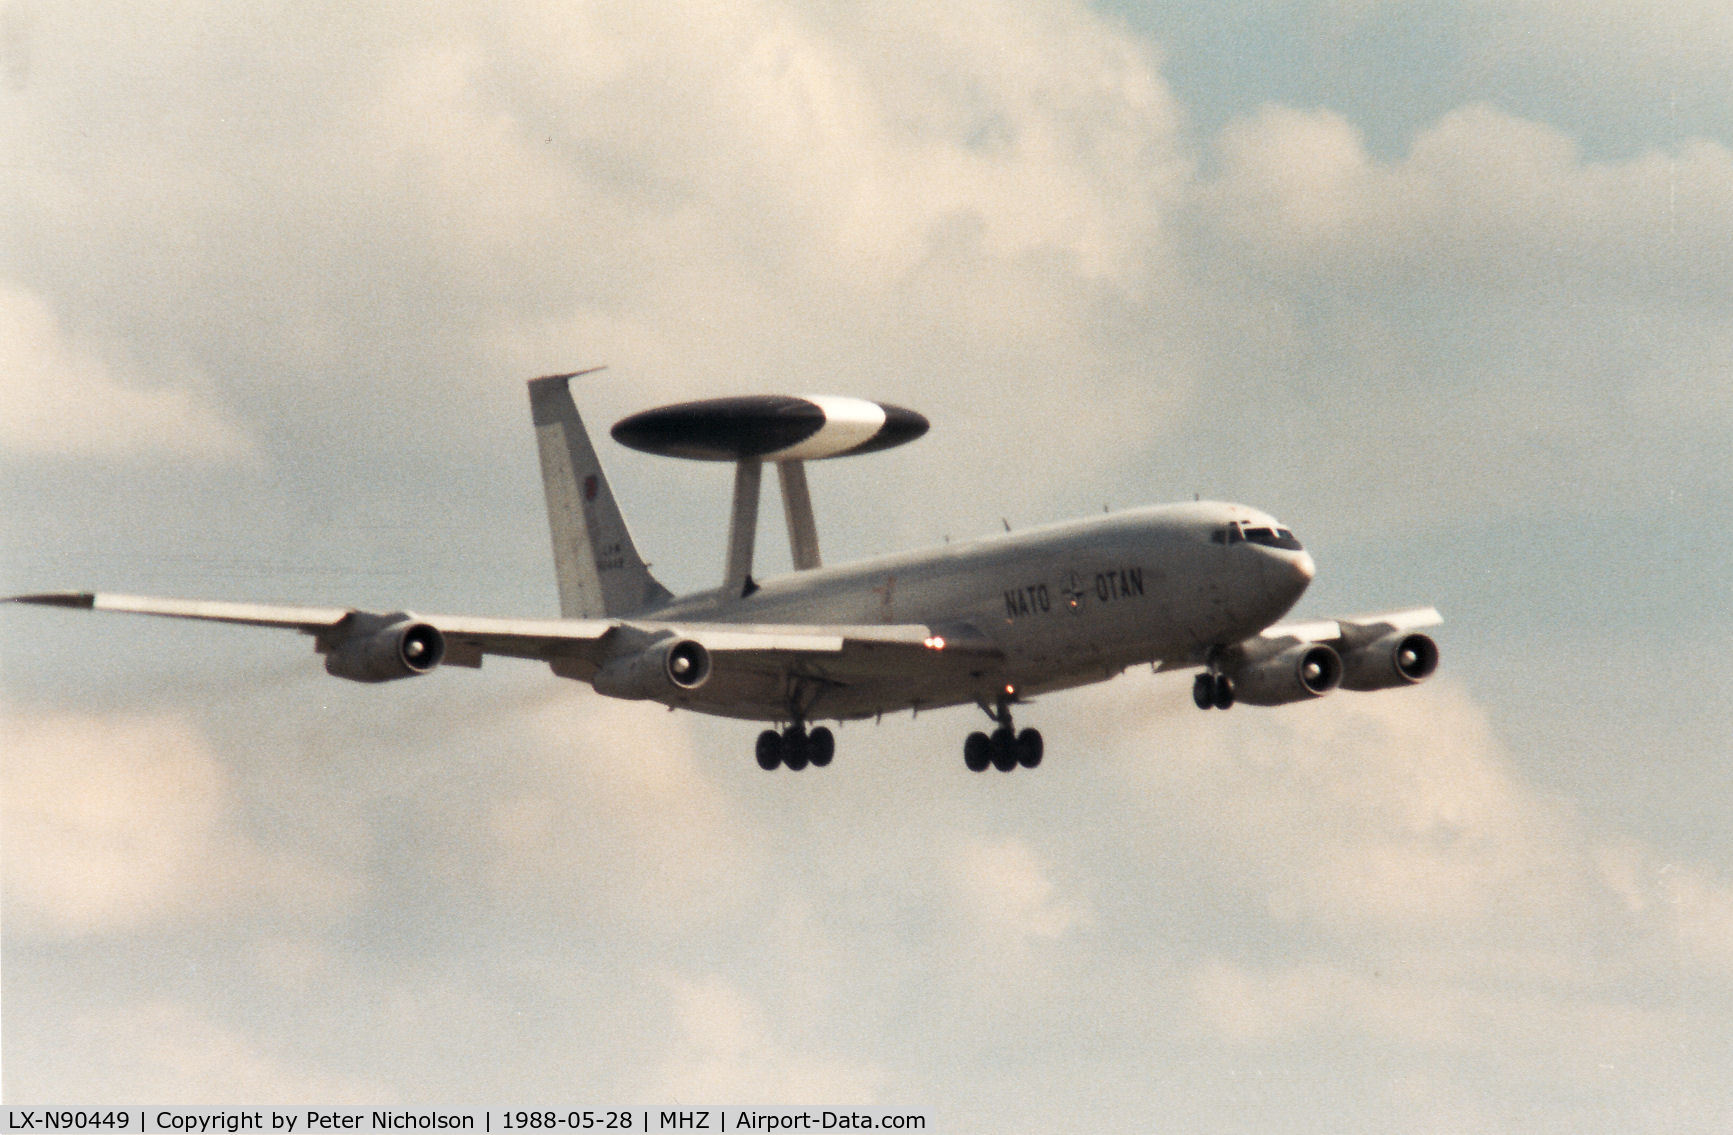 LX-N90449, 1983 Boeing E-3A Sentry C/N 22844, E-3A Sentry of the NATO Airborne Early Warning Force landing at the 1988 RAF Mildenhall Air Fete.